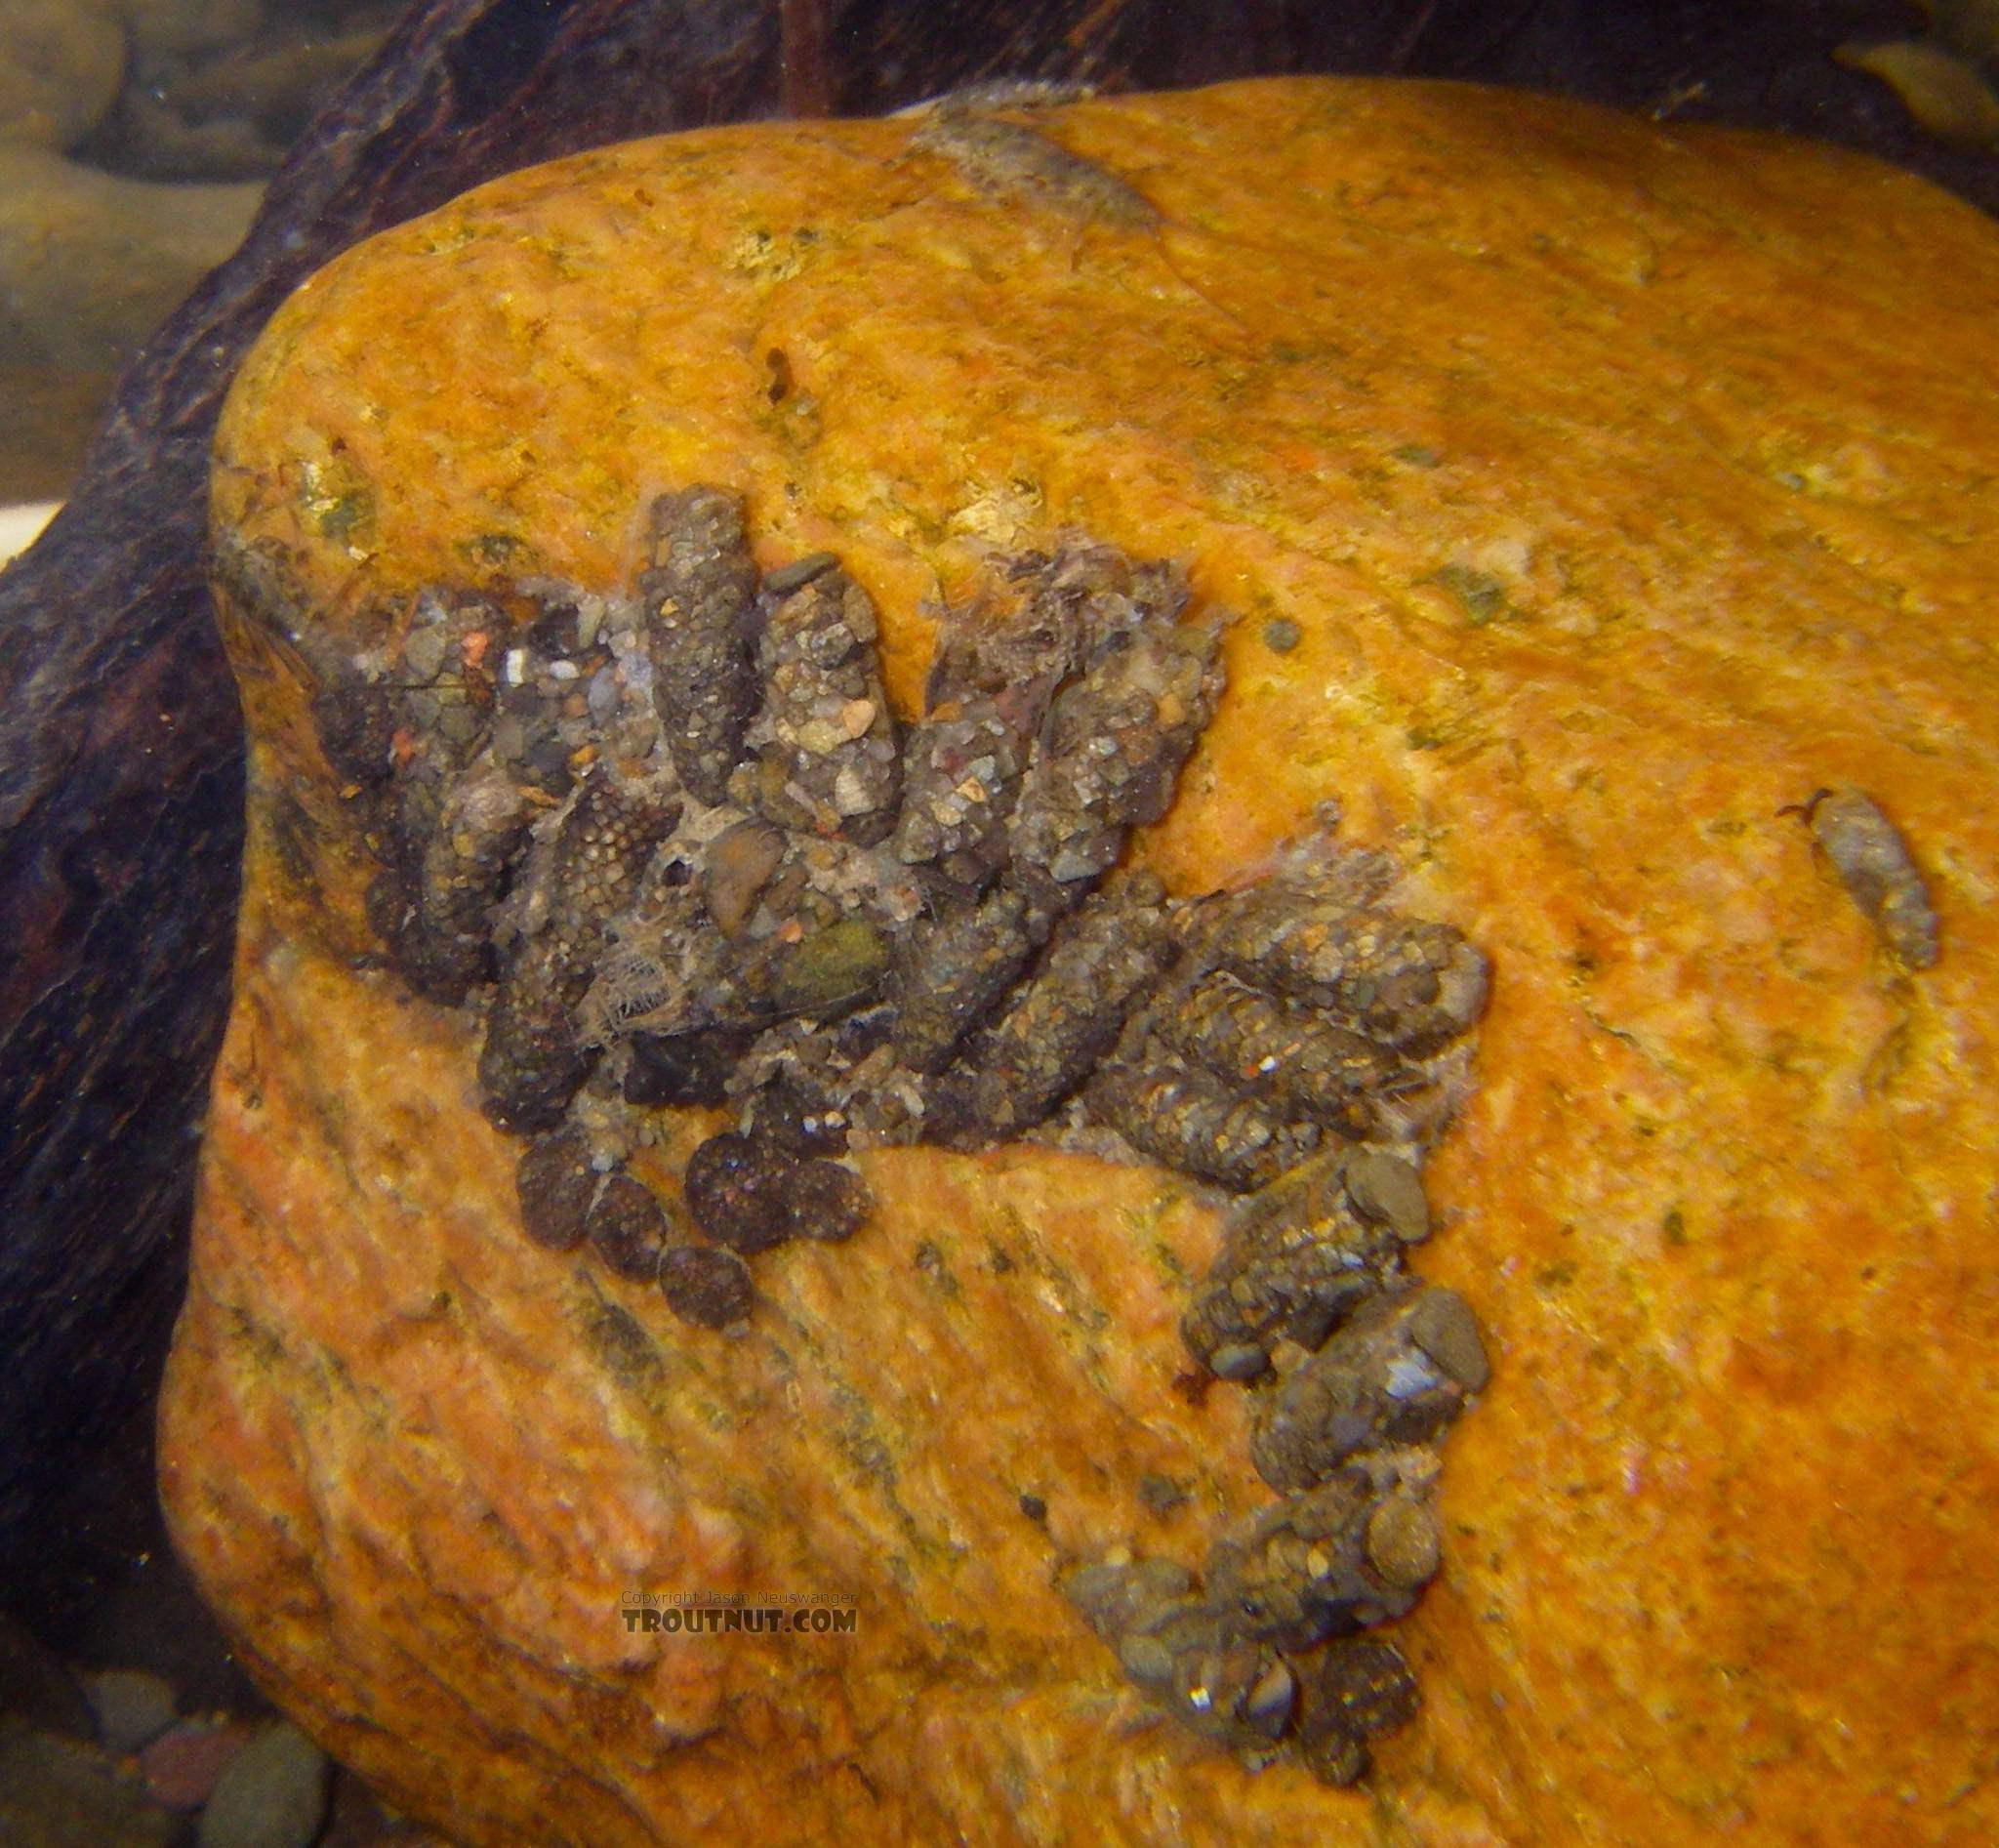 A variety of cased caddisfly larvae, probably mostly Neophylax, have clustered along the backside of a rock in fast water.  There seem to be some Helicopsychidae larvae clustered along the bottom, and a few other taxa are mixed in.  It's interesting that several larvae have especially large stones placed over the front openings of their cases, perhaps to block the case off for pupation.

It does seem to be the wrong time of year for Neophylax to be pupating, but that was the ID given for one of these which I collected and photographed up close.  In this picture: Caddisfly Genus Helicopsyche (Speckled Peters) and Caddisfly Genus Neophylax (Autumn Mottled Sedges). From Cayuta Creek in New York.